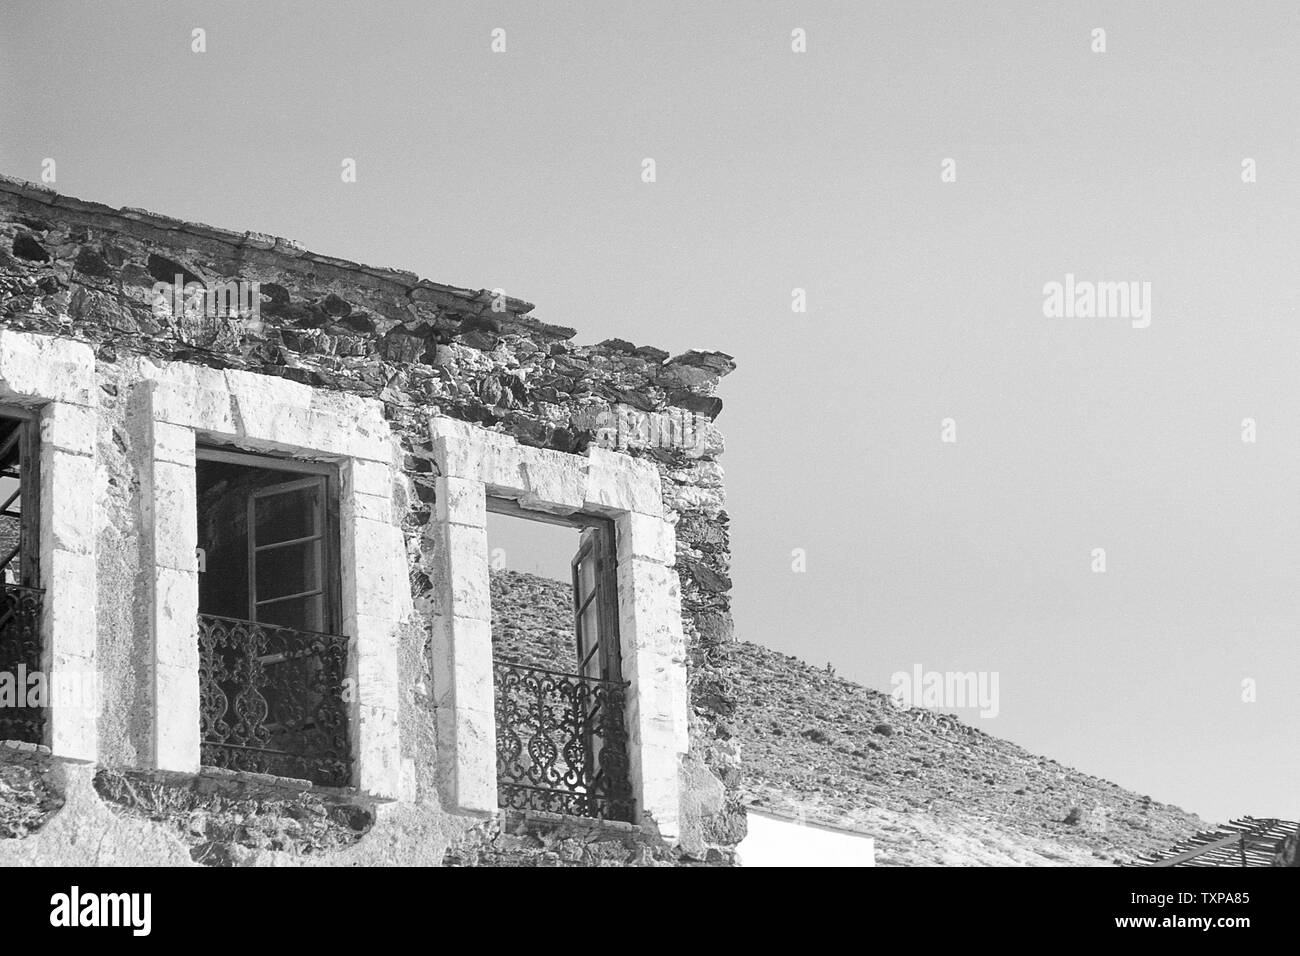 REAL DE CATORCE, SLP/MEXICO - NOV 18, 2002: Architectural detail of abandoned house. Stock Photo